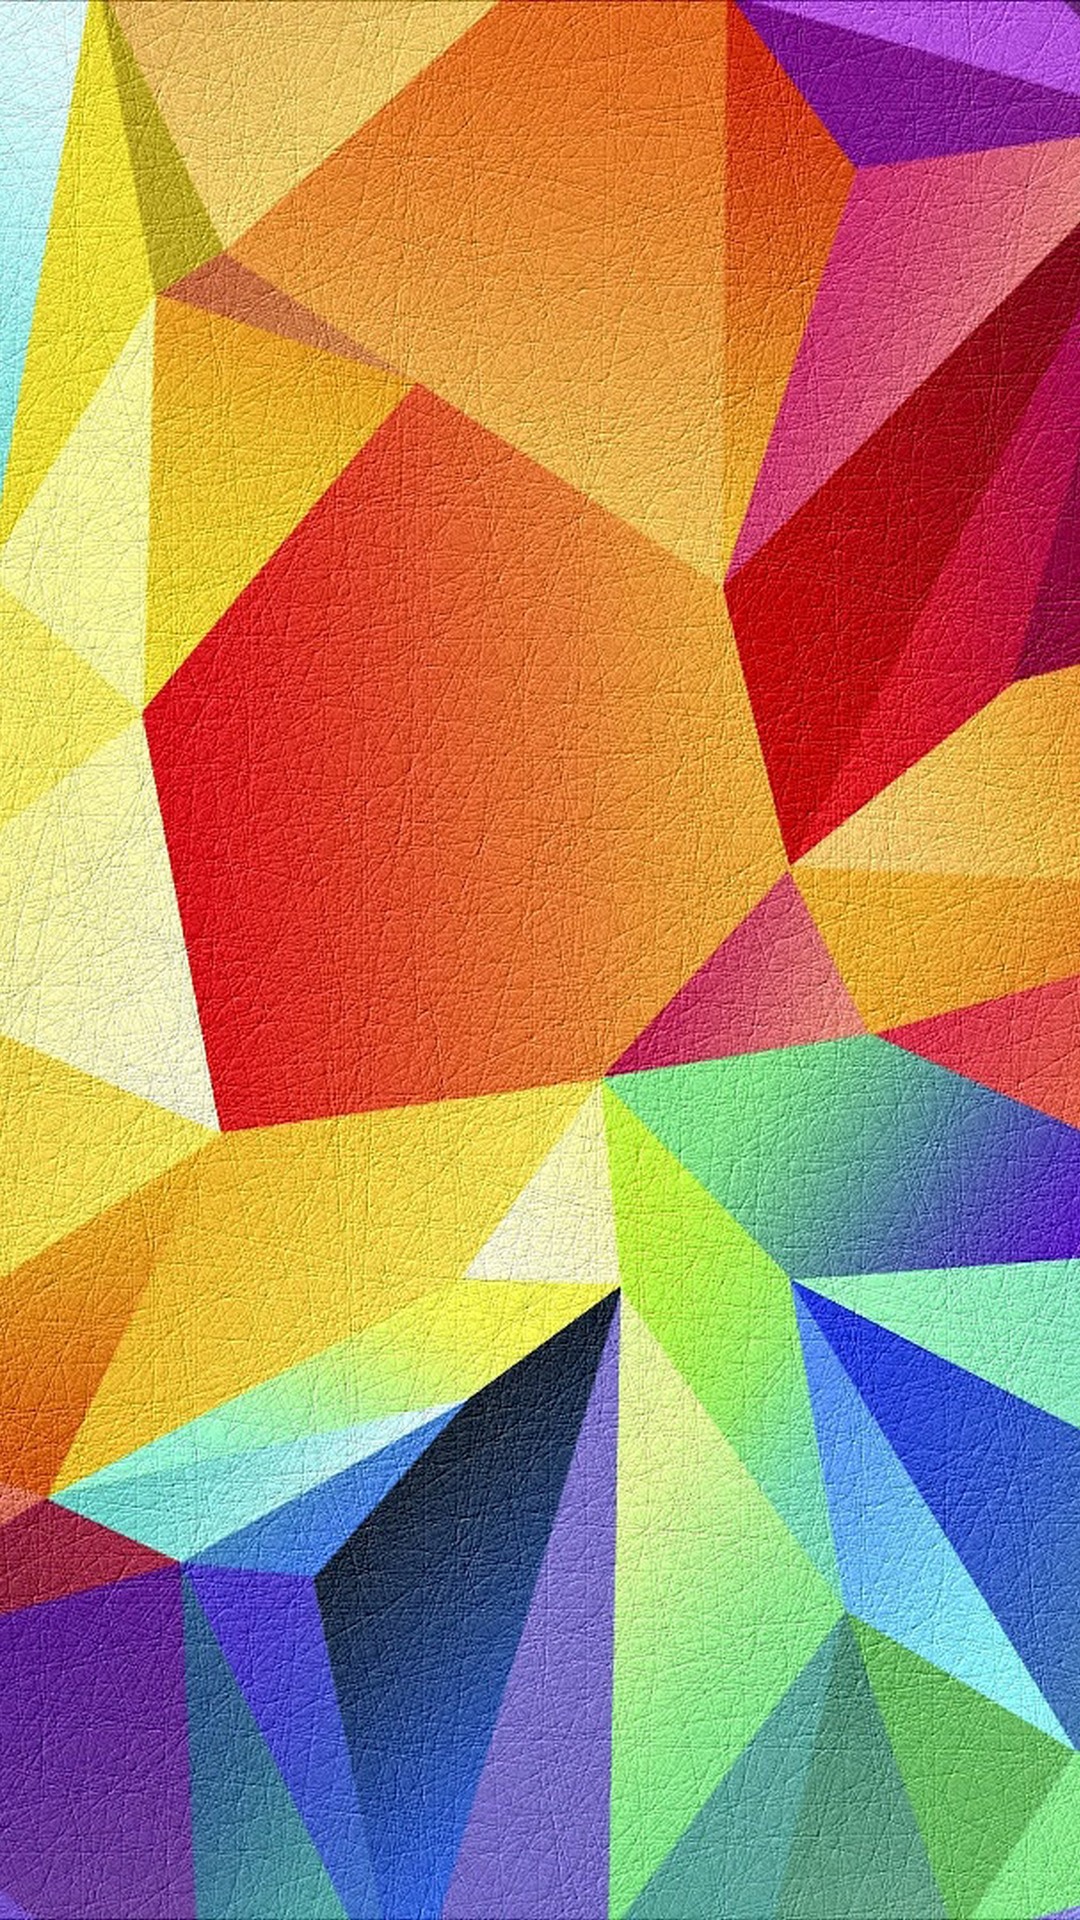 Geometric Shapes Colorful Patterns 2020 Wallpapers